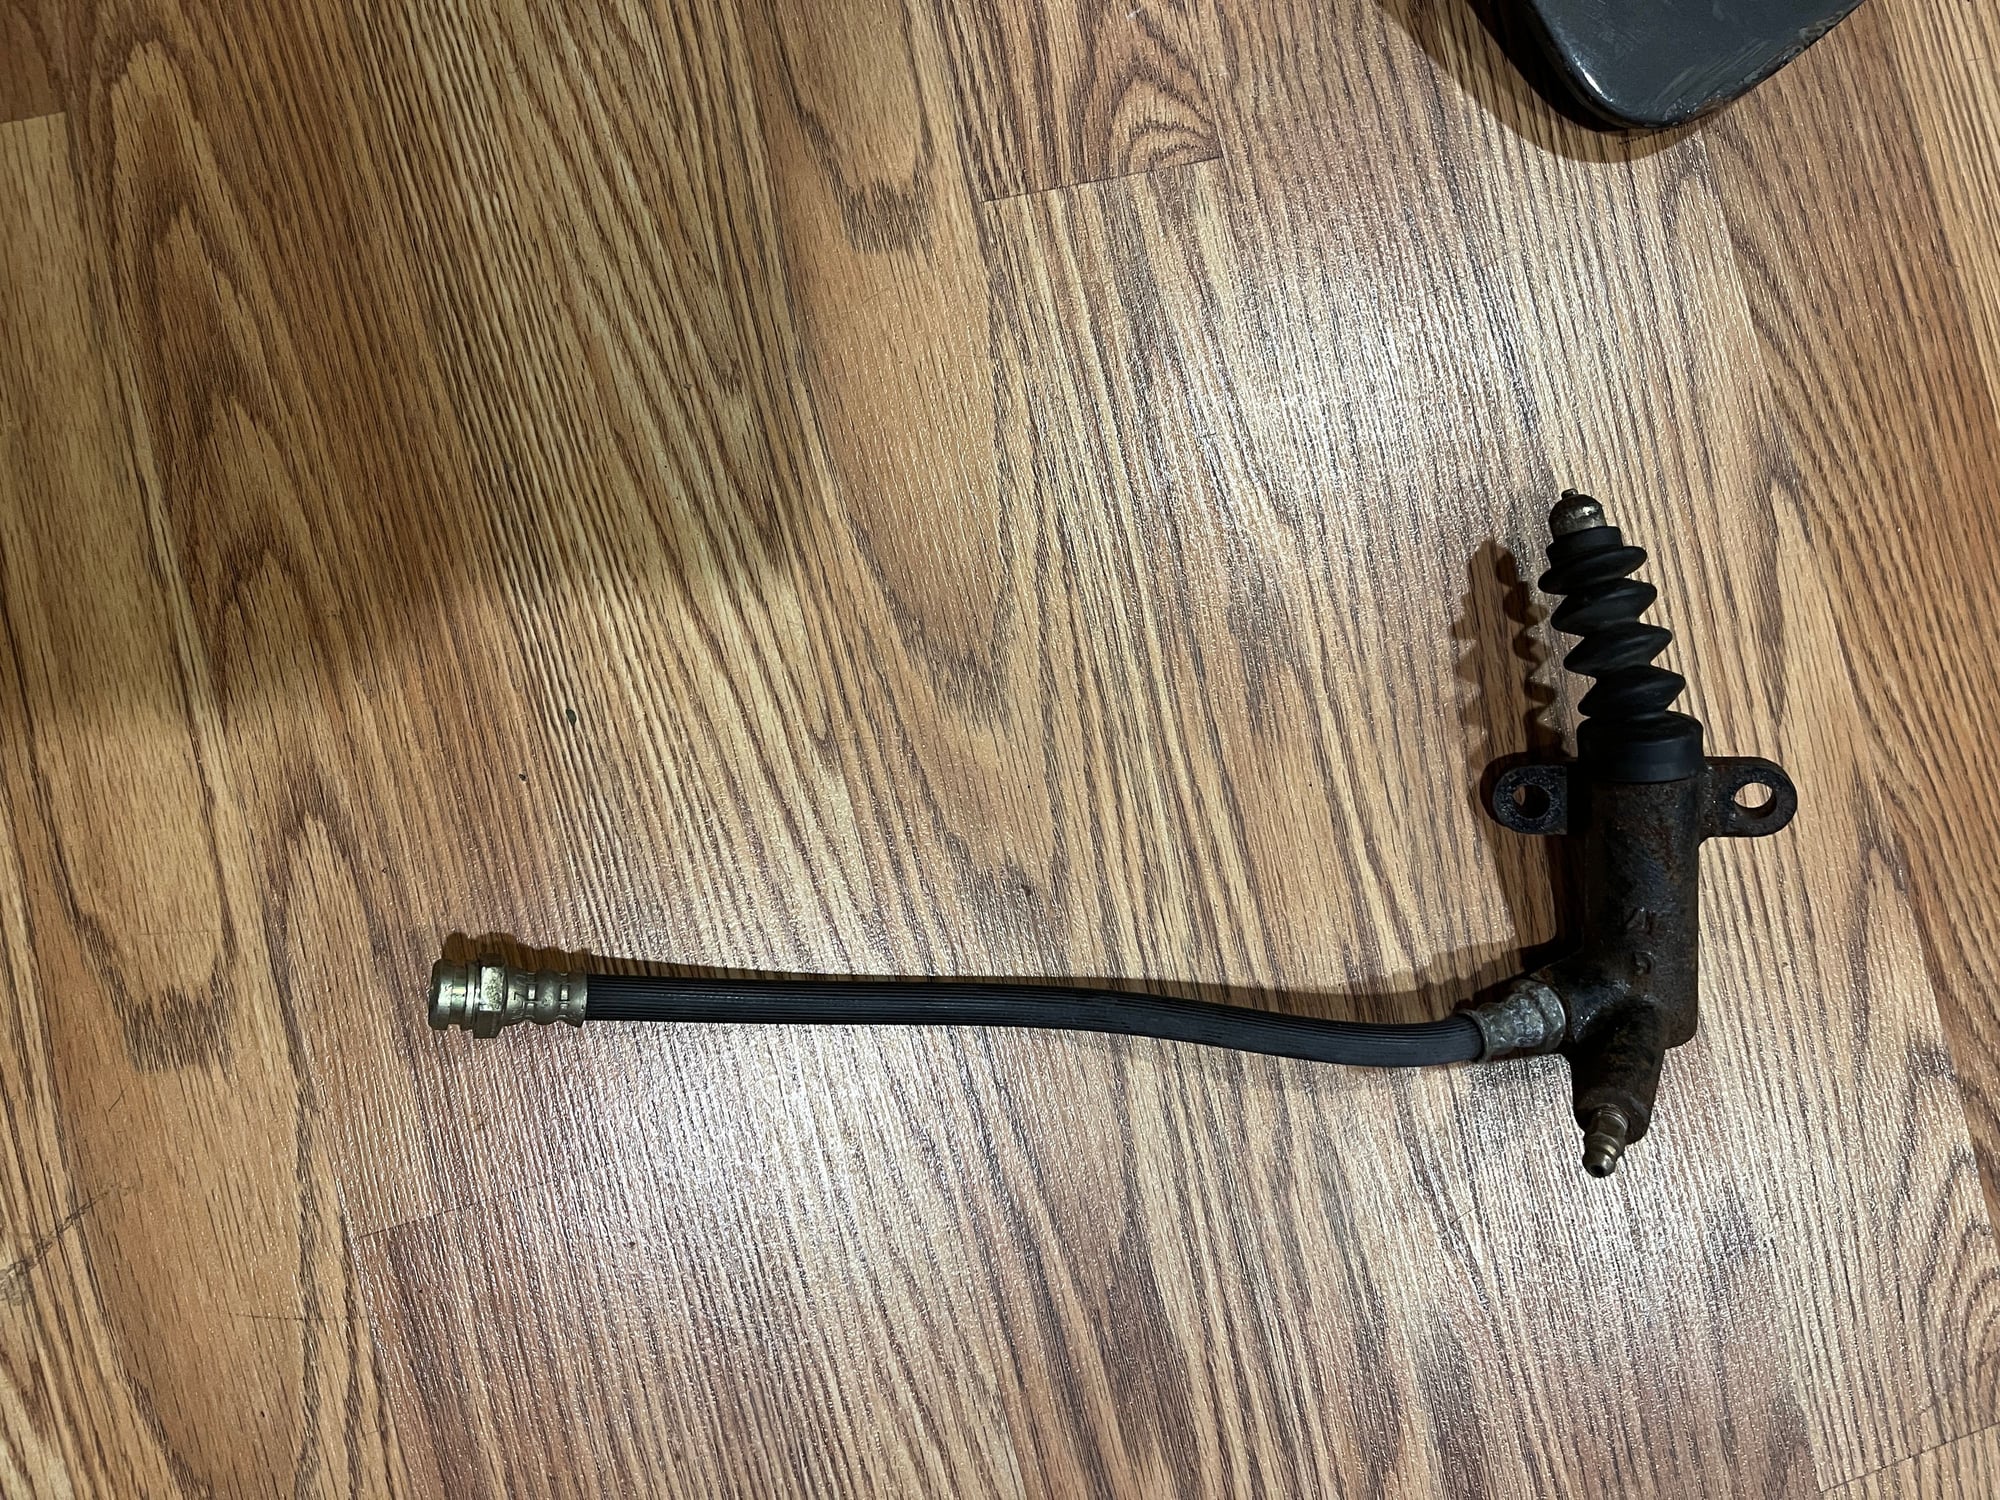 Drivetrain - First Gen Clutch Slave Cylinder - Used - 0  All Models - New Canaan, CT 06840, United States